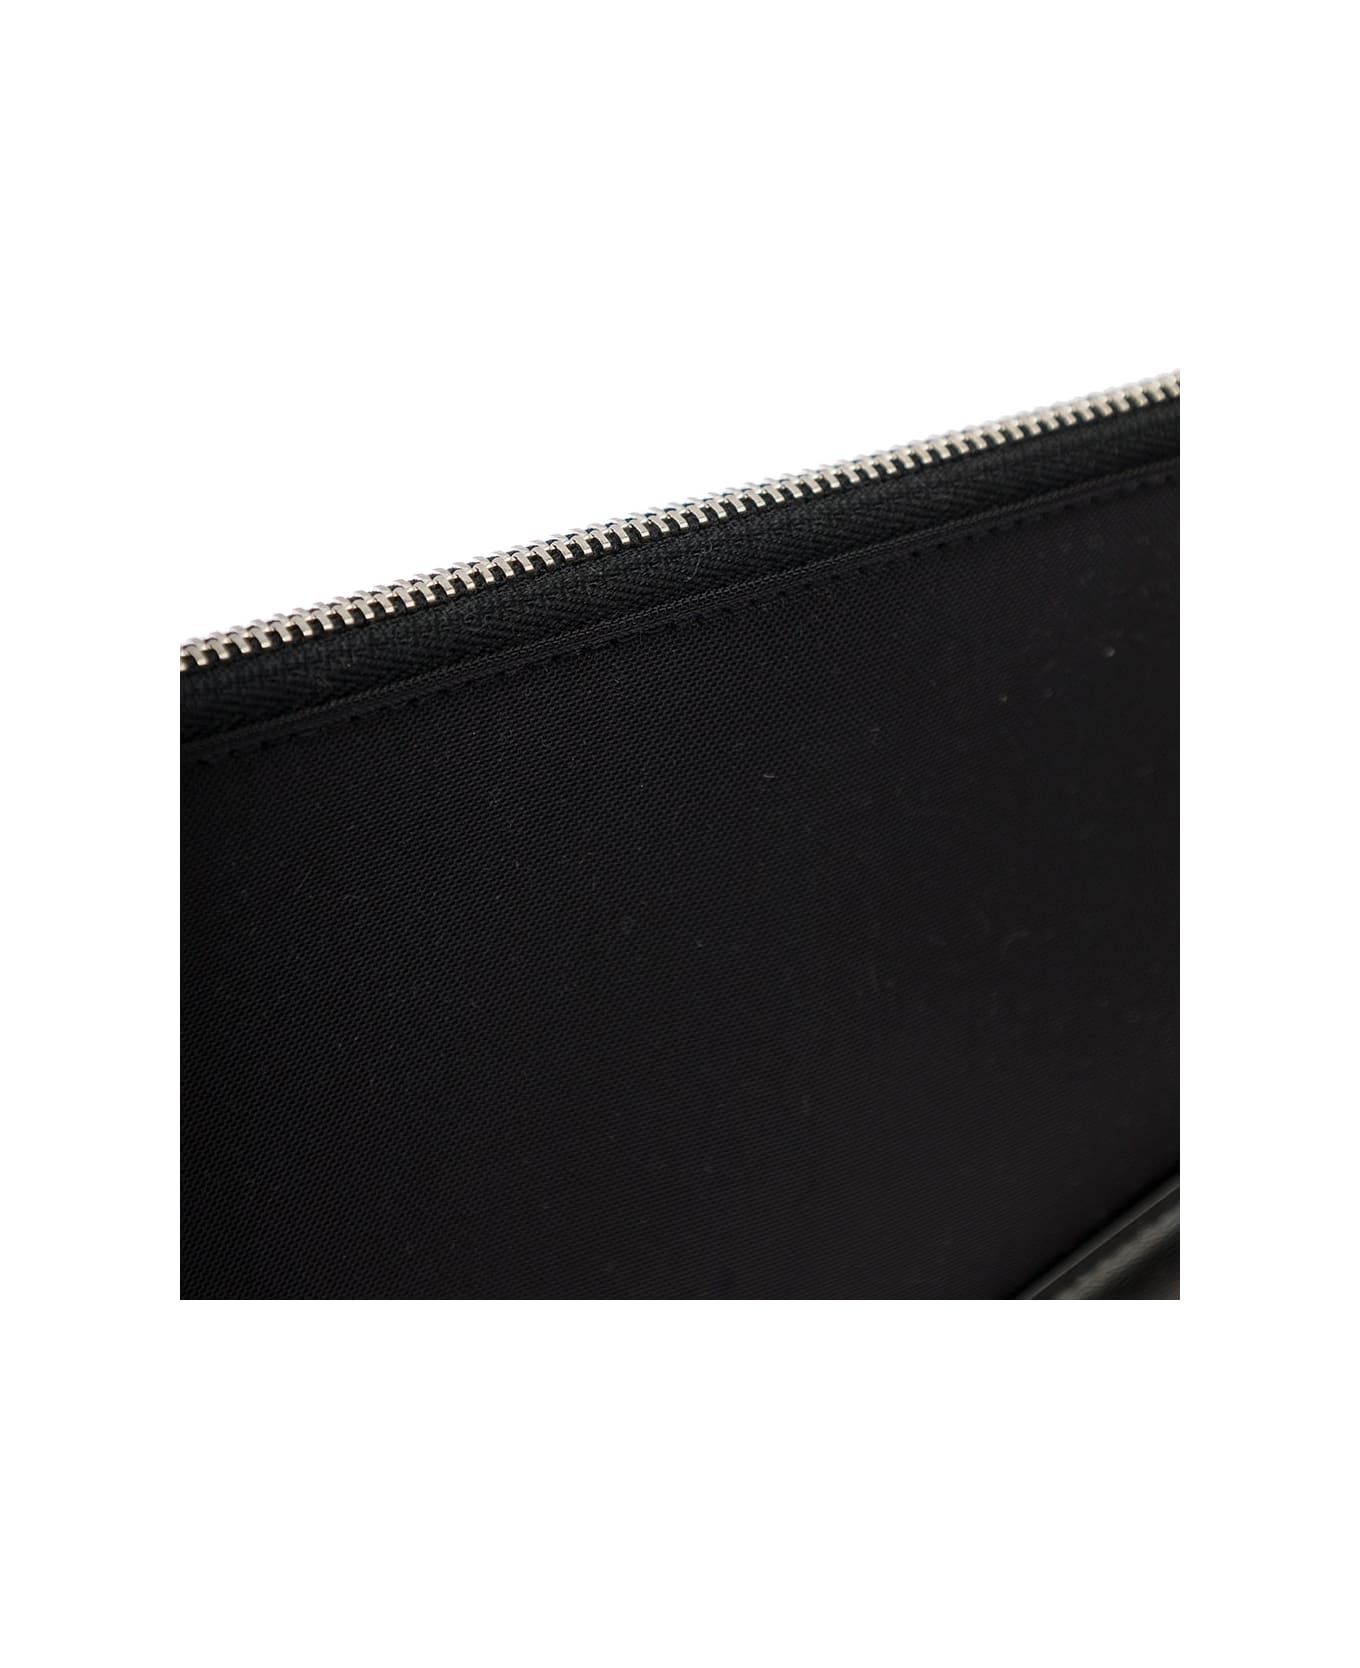 Alexander McQueen Black Pouch With Harness Detail In Nylon Man Alexander Mcqueen - Black バッグ